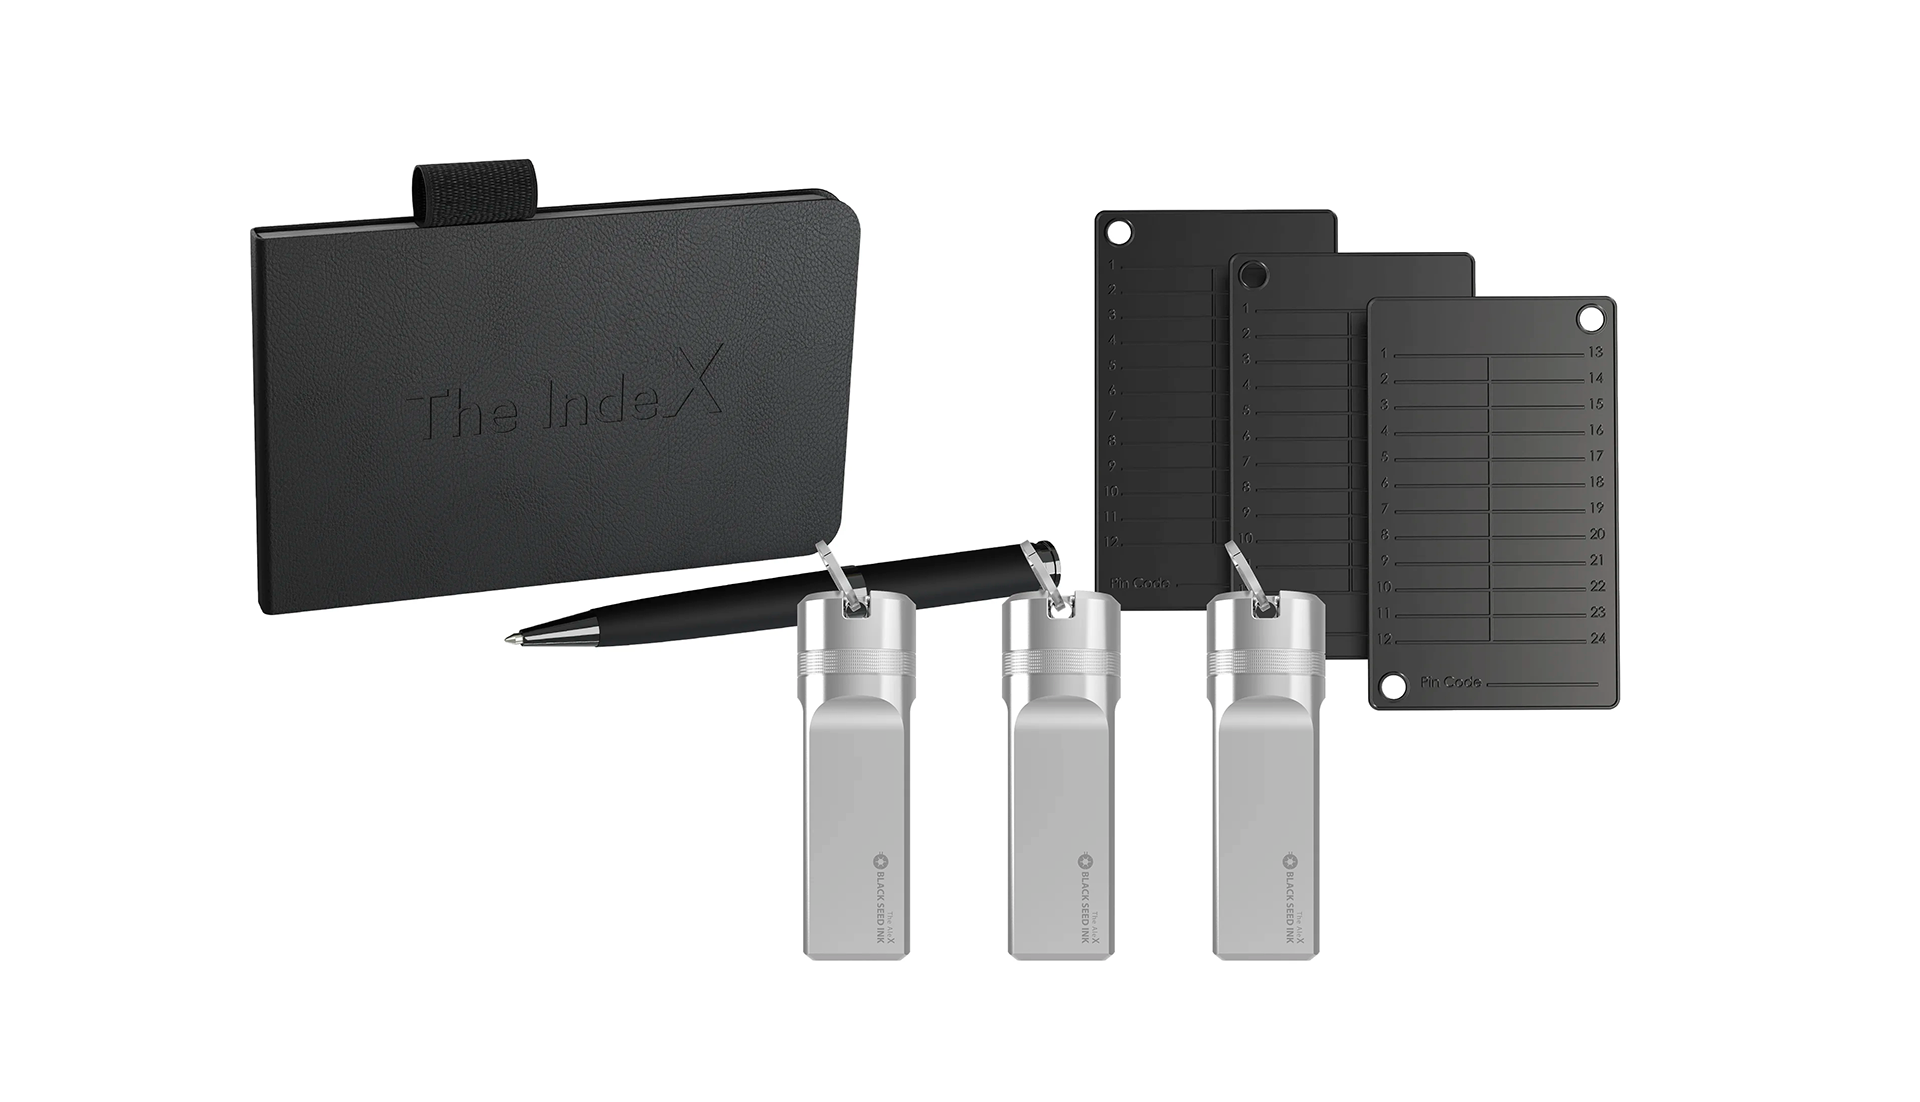 5th full: The IndeX with pen, three seed phrase plates, three of The AleX titanium capsules for Ledger Nano hardware wallets